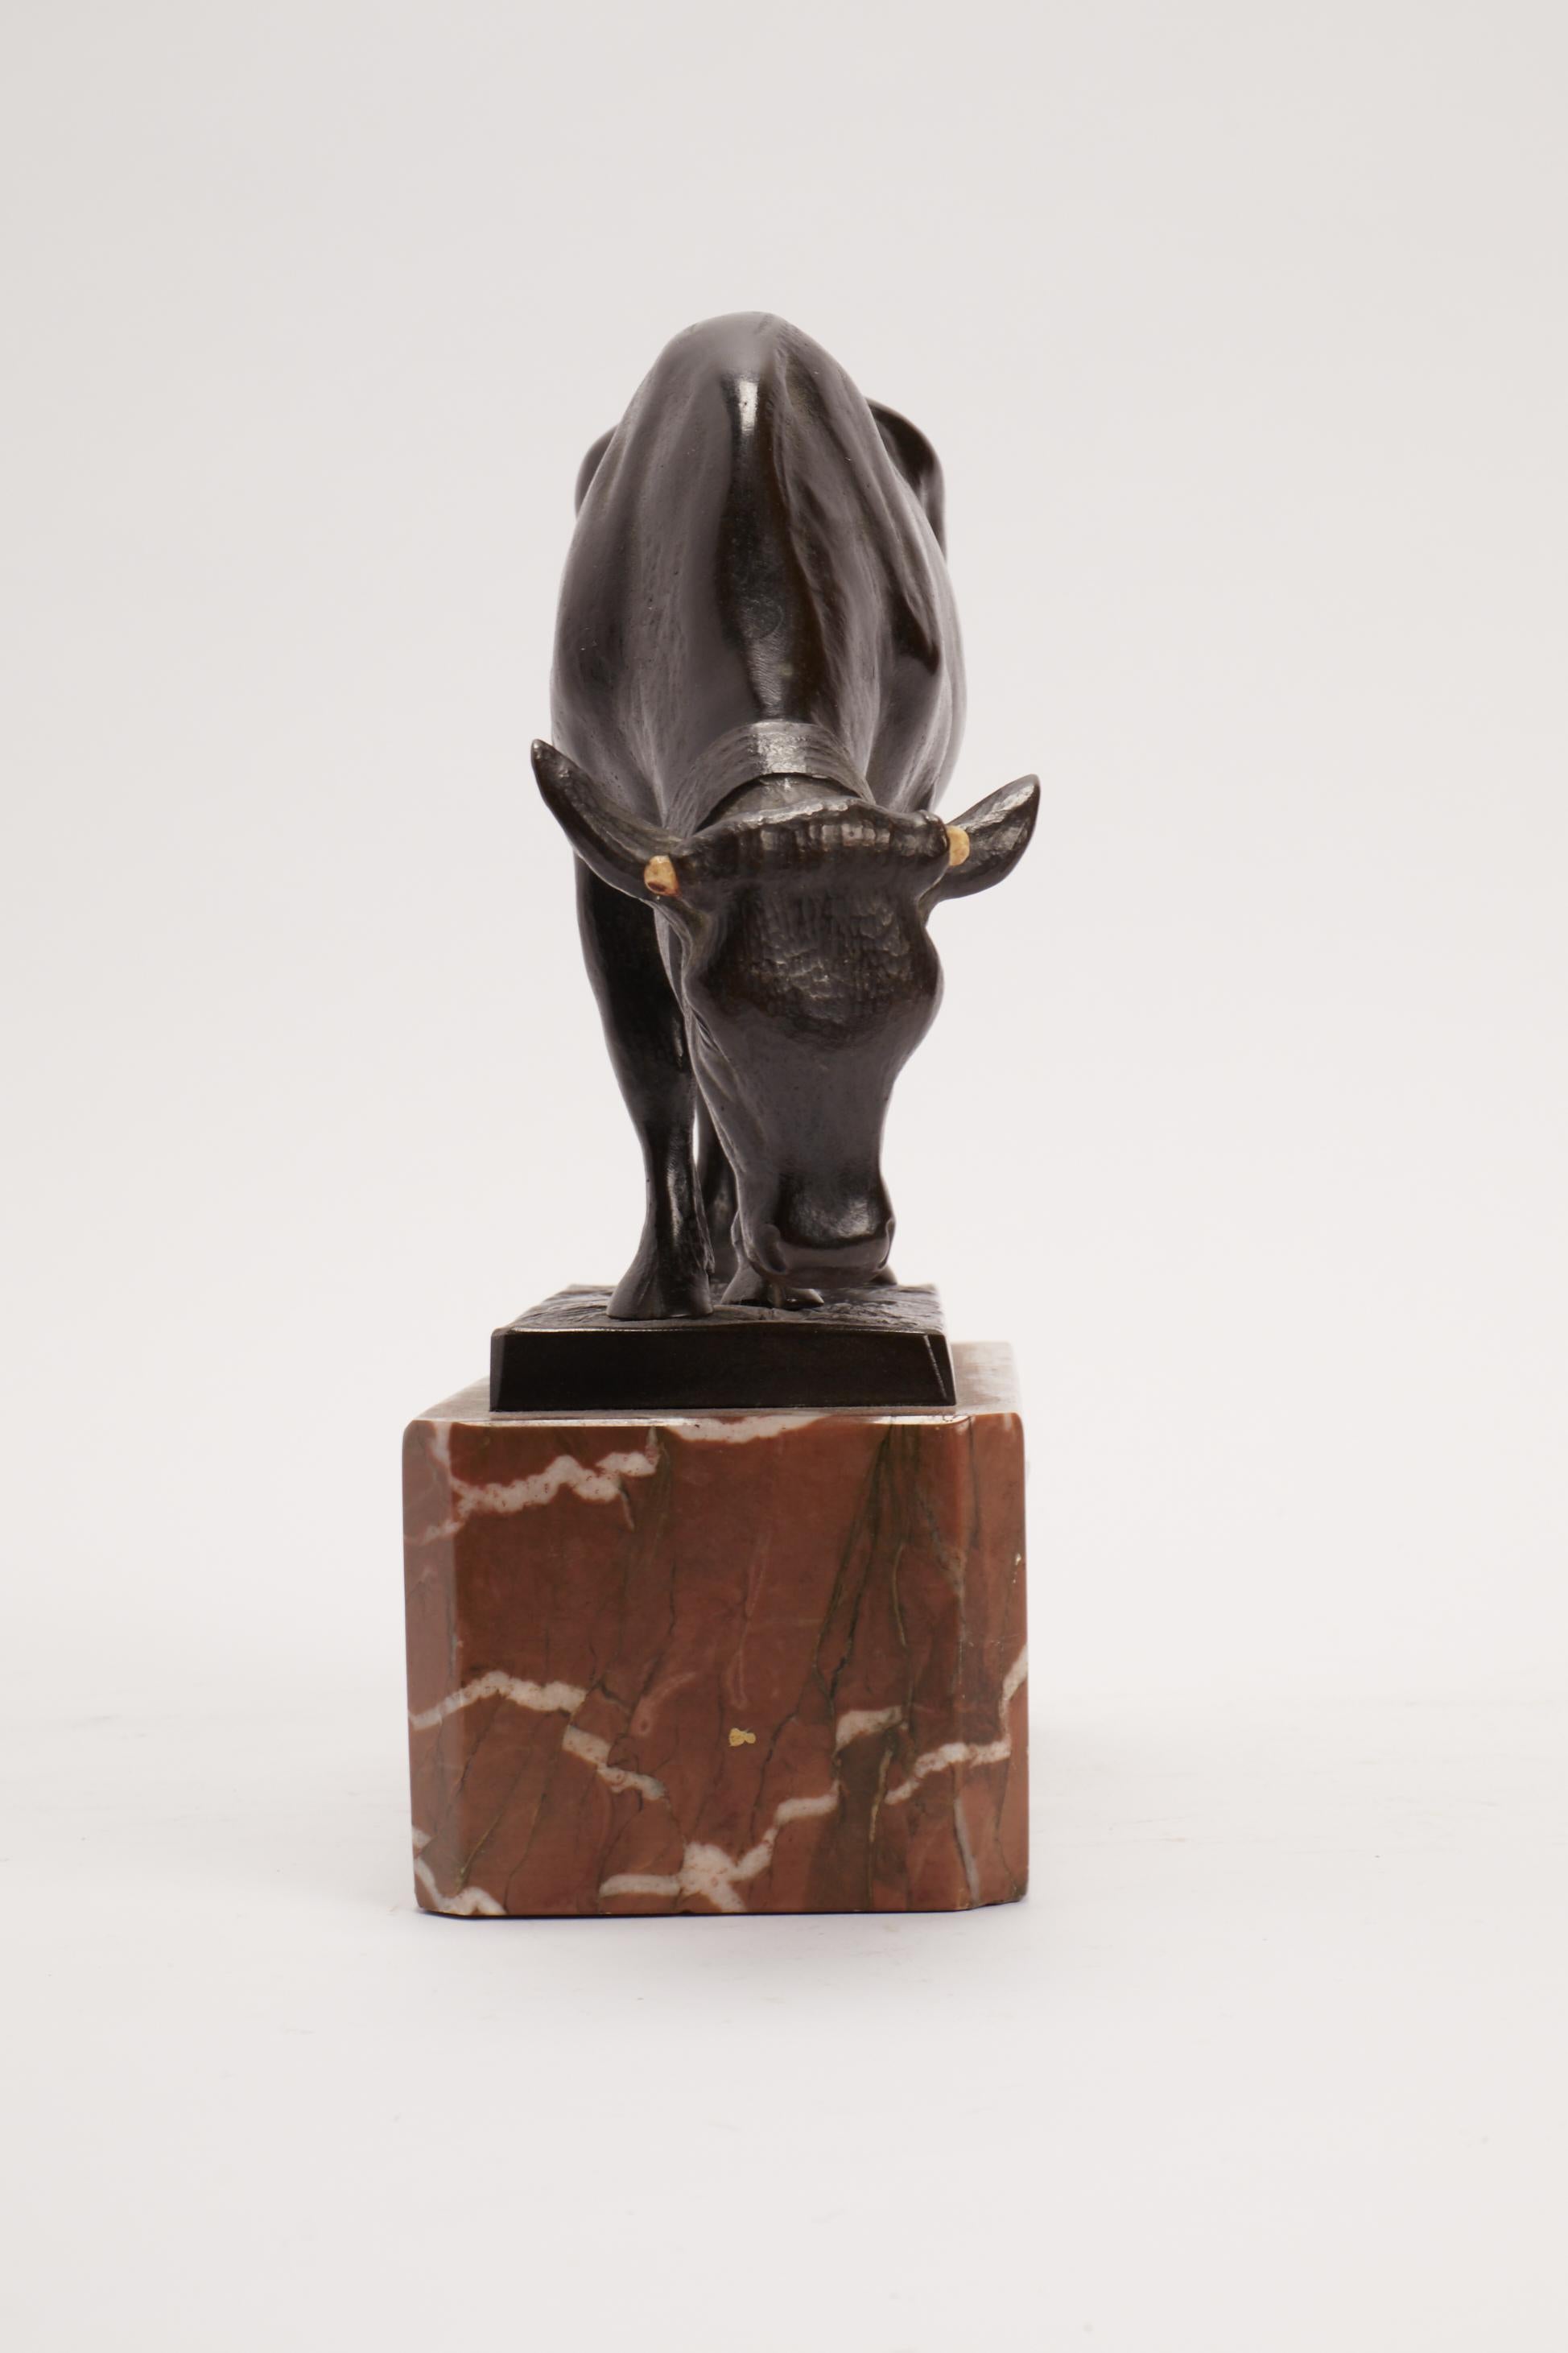 A lost wax bronze sculpture depicting a cow grazing on a meadow, on a Verona red marble base. The cow's horns are made of bovine horn. Signed Moseritz. France circa 1880.